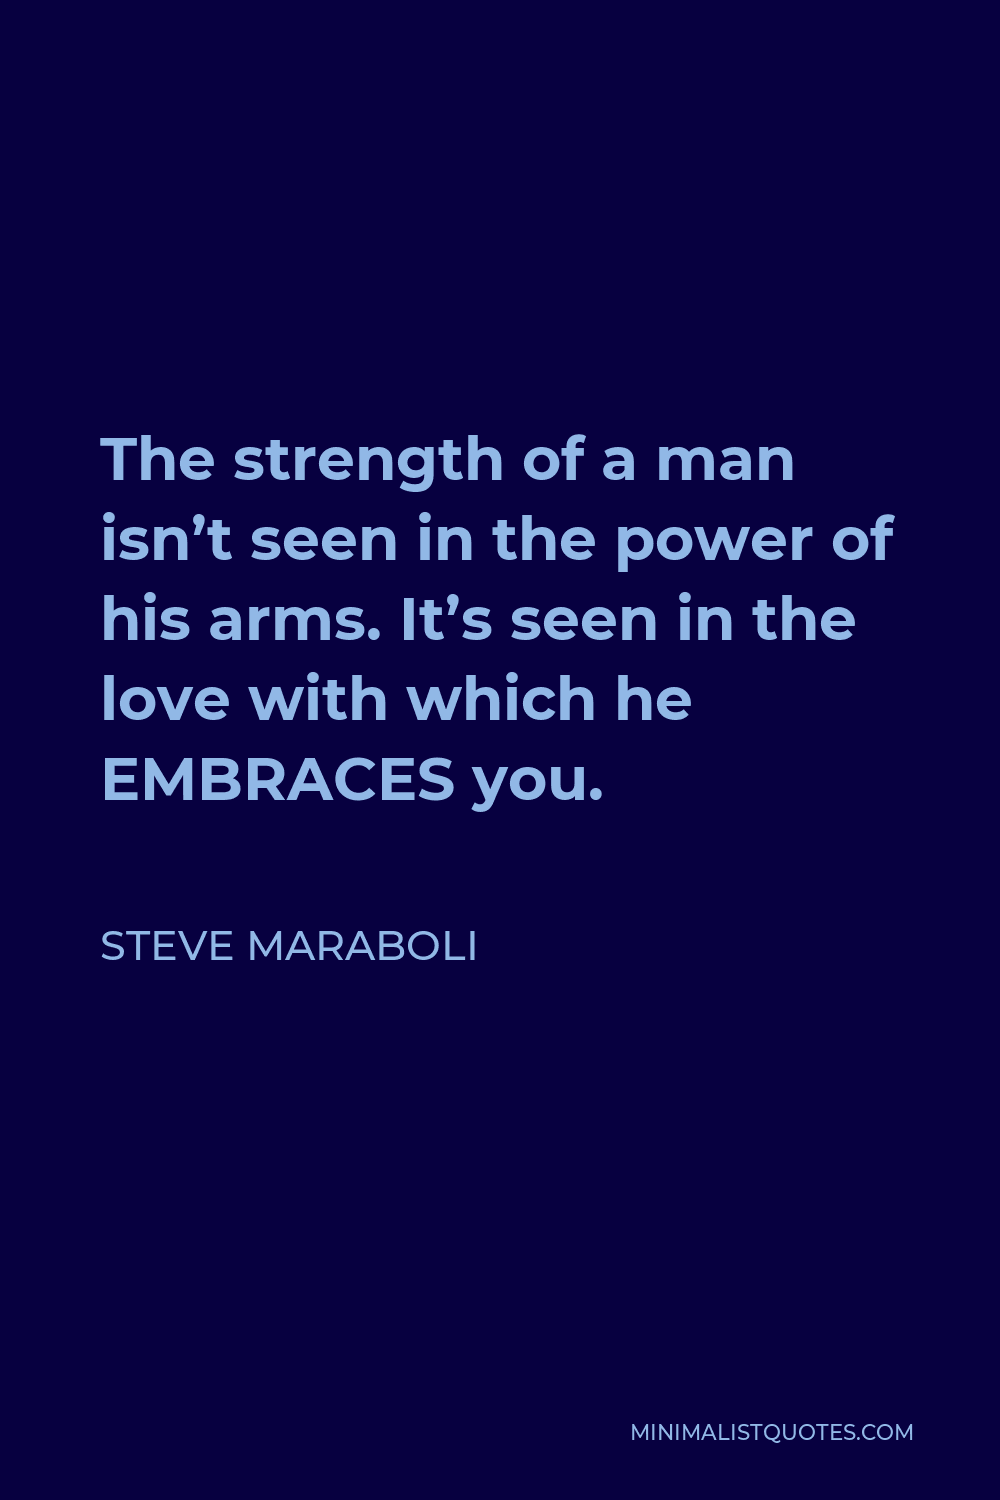 Steve Maraboli Quote - The strength of a man isn’t seen in the power of his arms. It’s seen in the love with which he EMBRACES you.